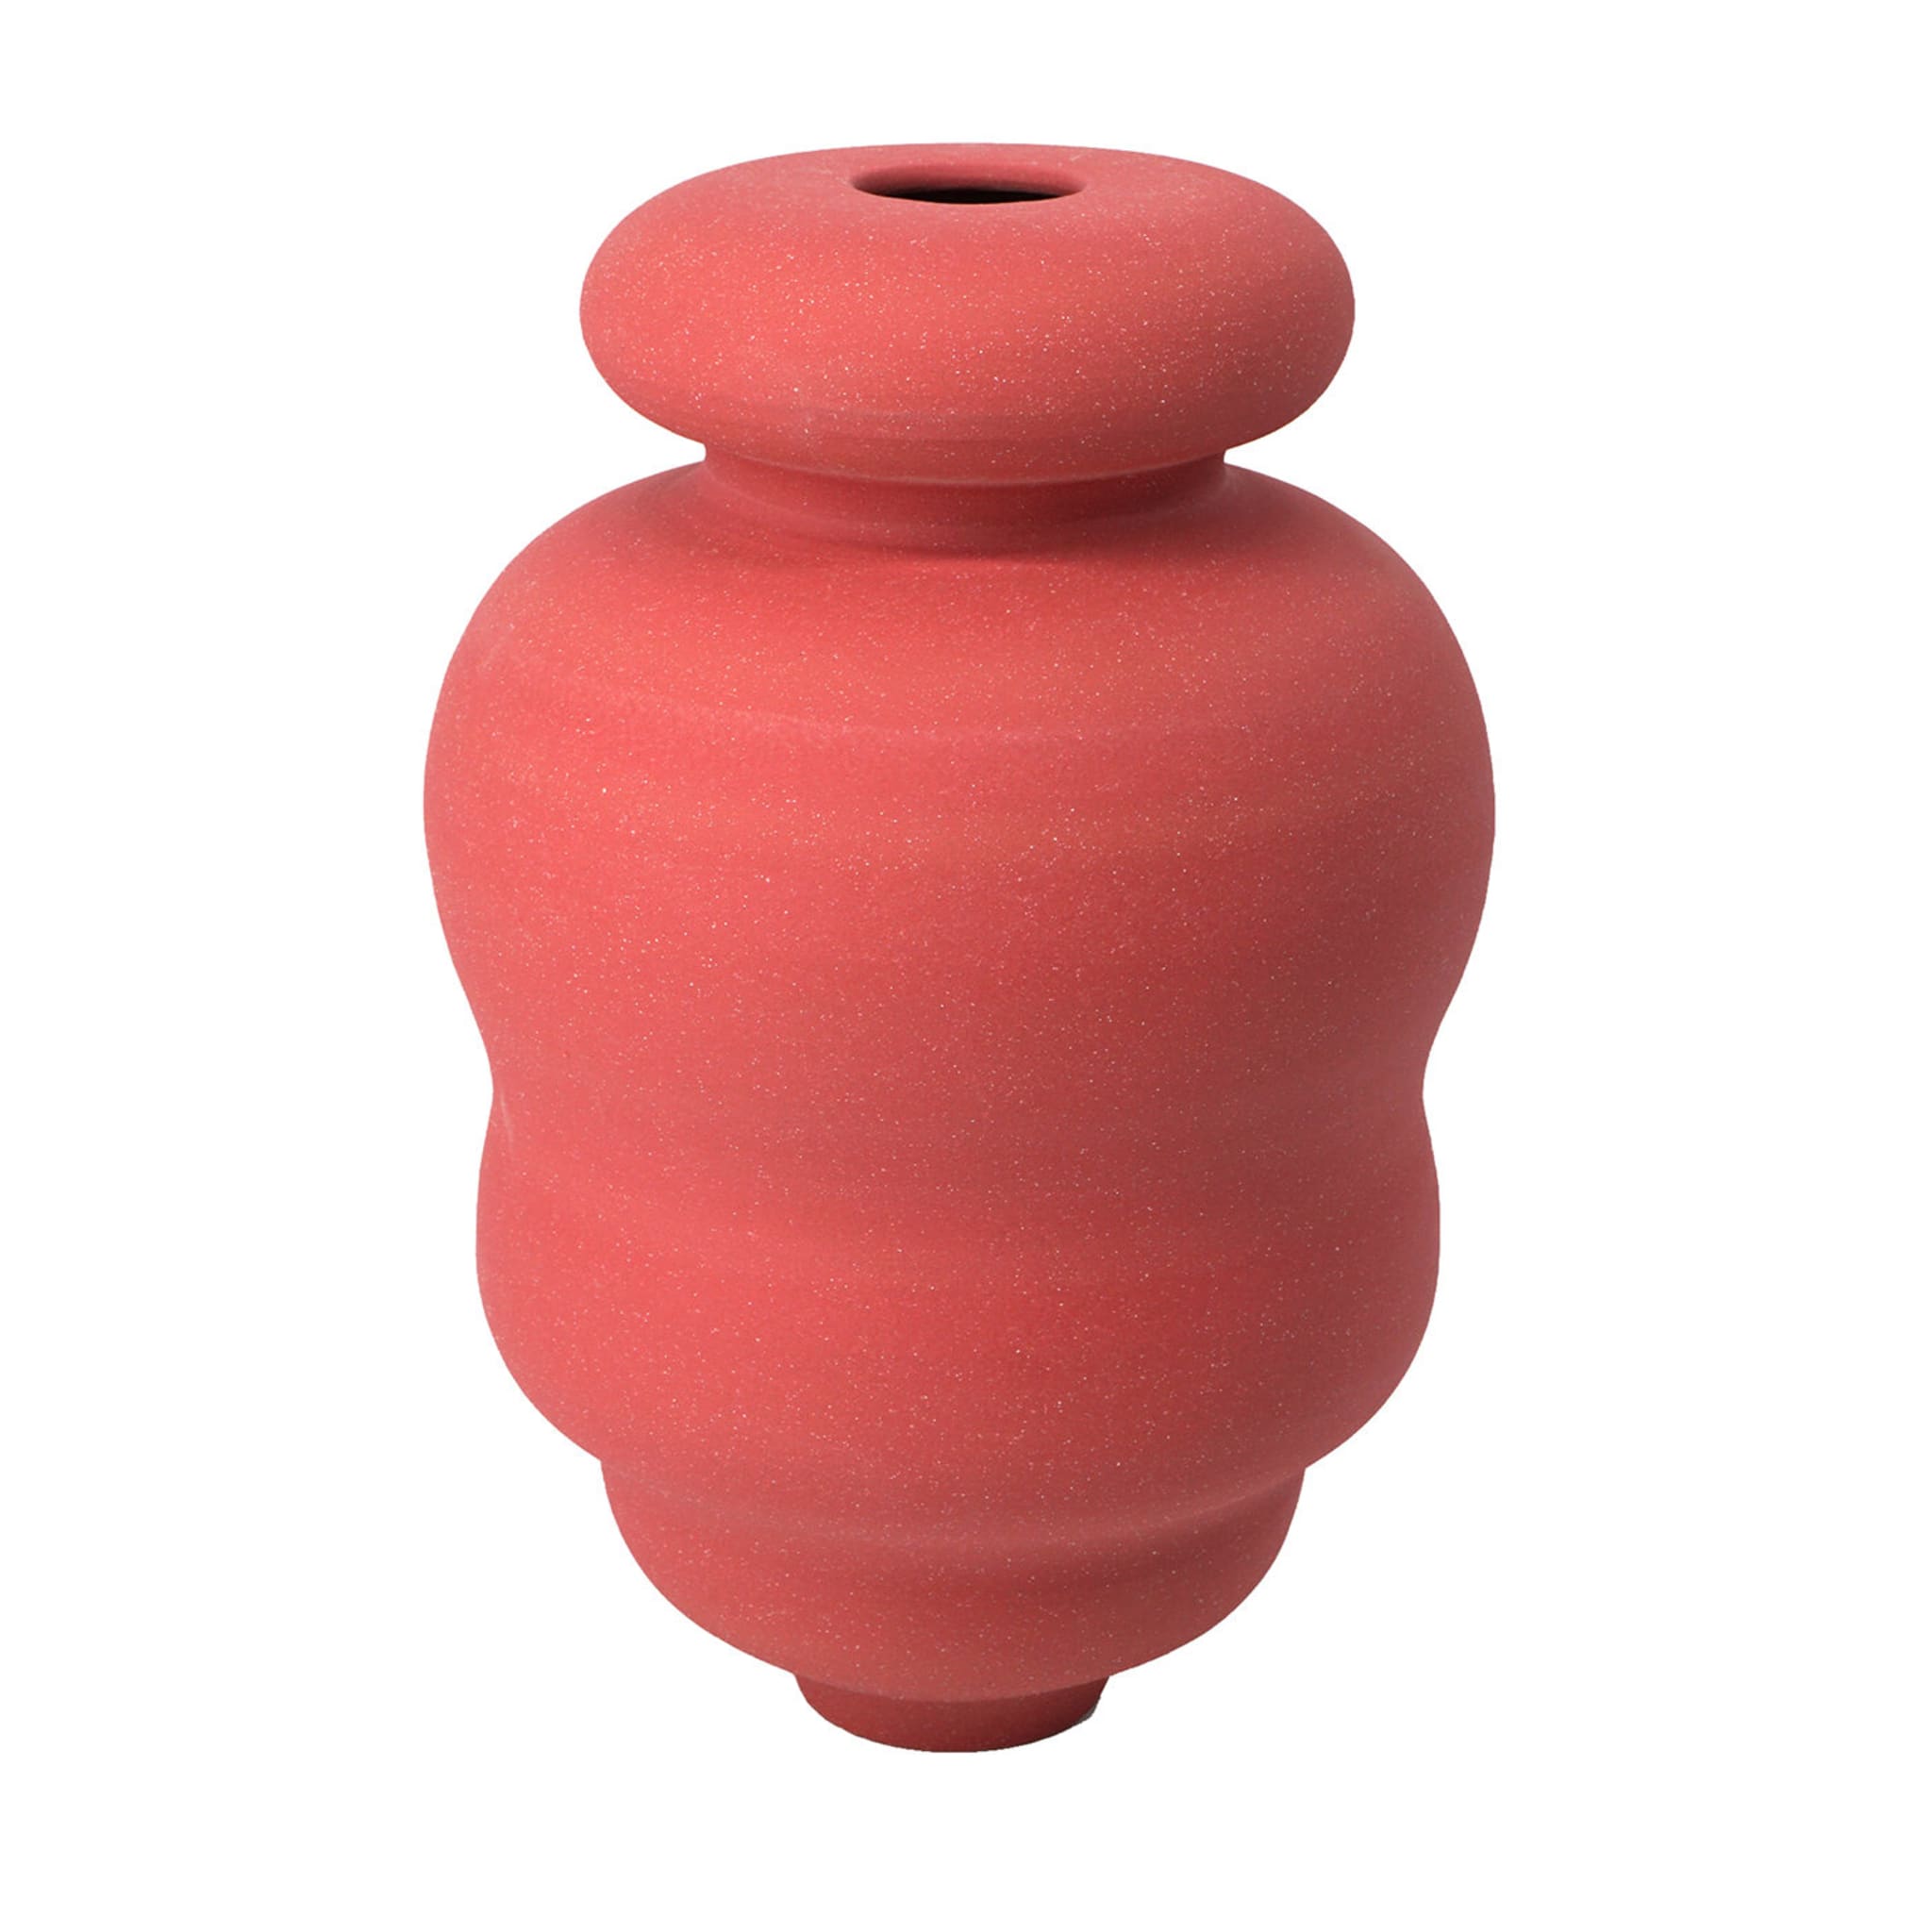 Crisalide Red Vase #7 - Main view